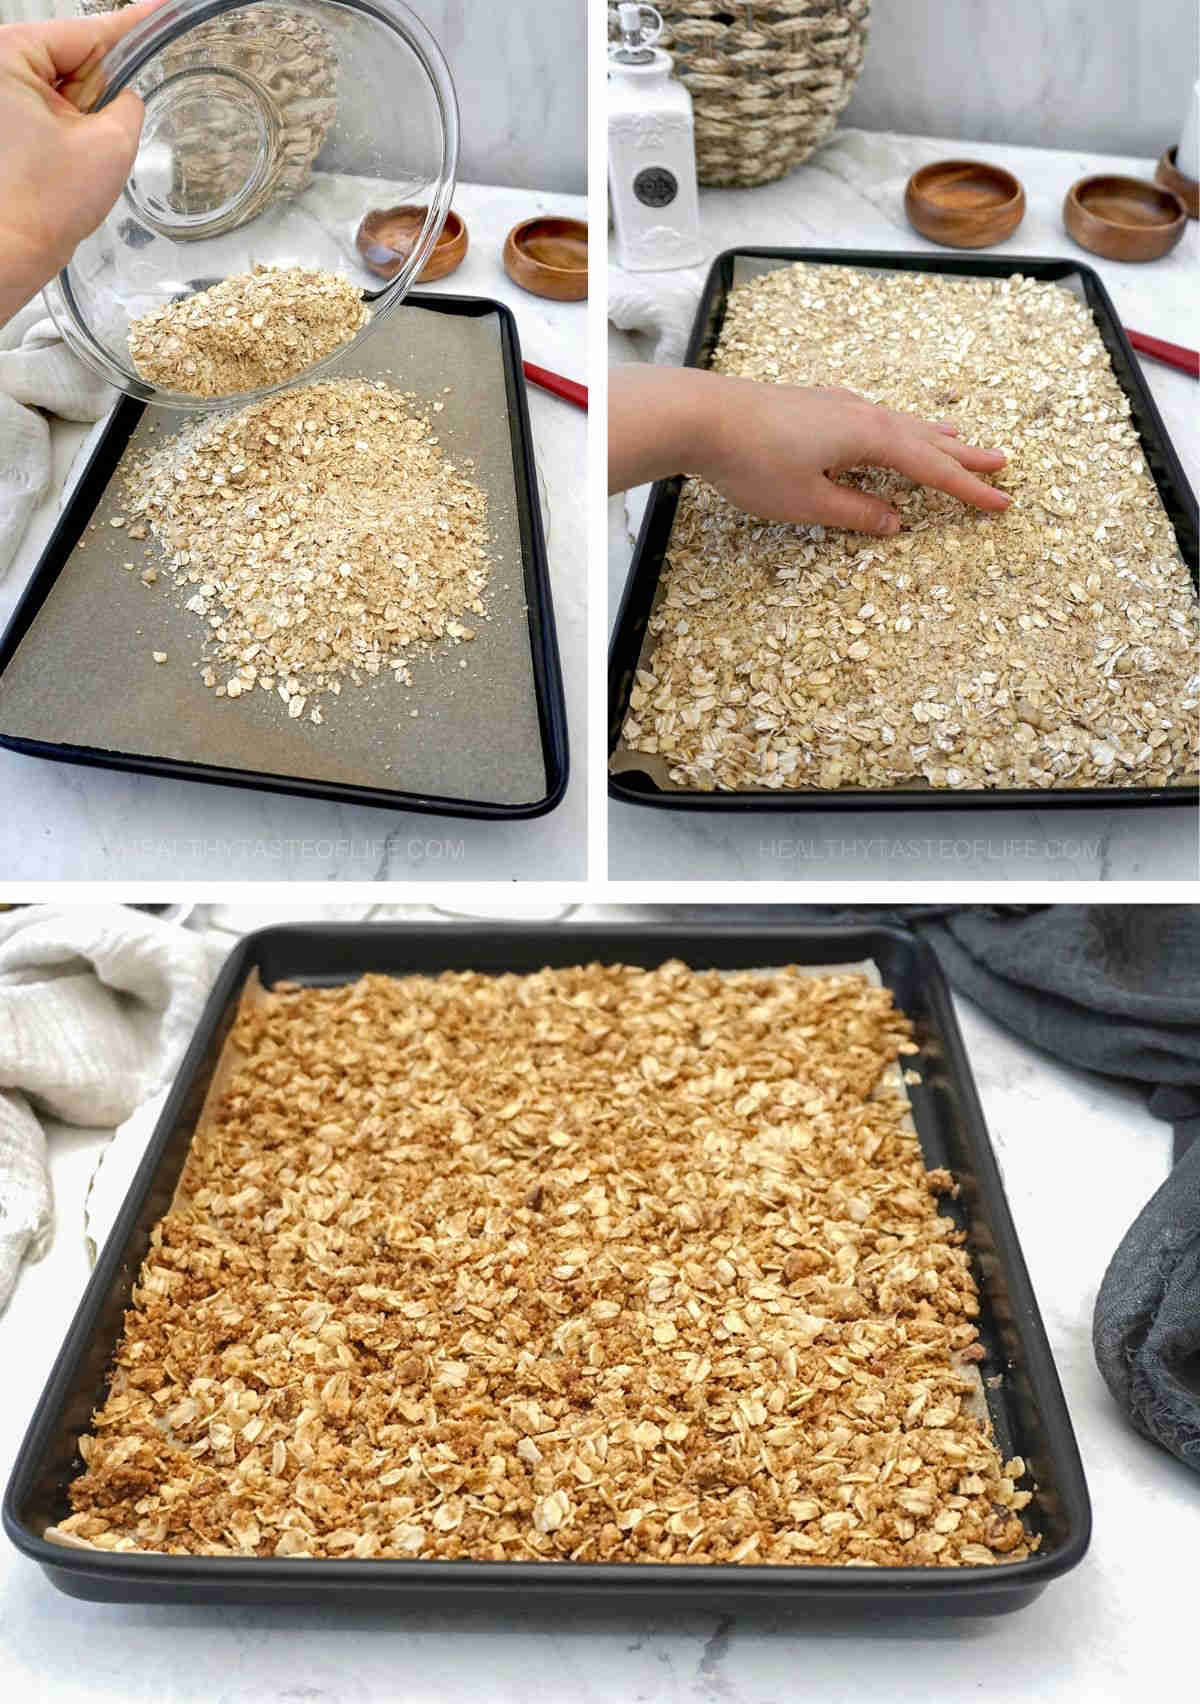 Process shots showing how to make oat topping with crumble and bake it.